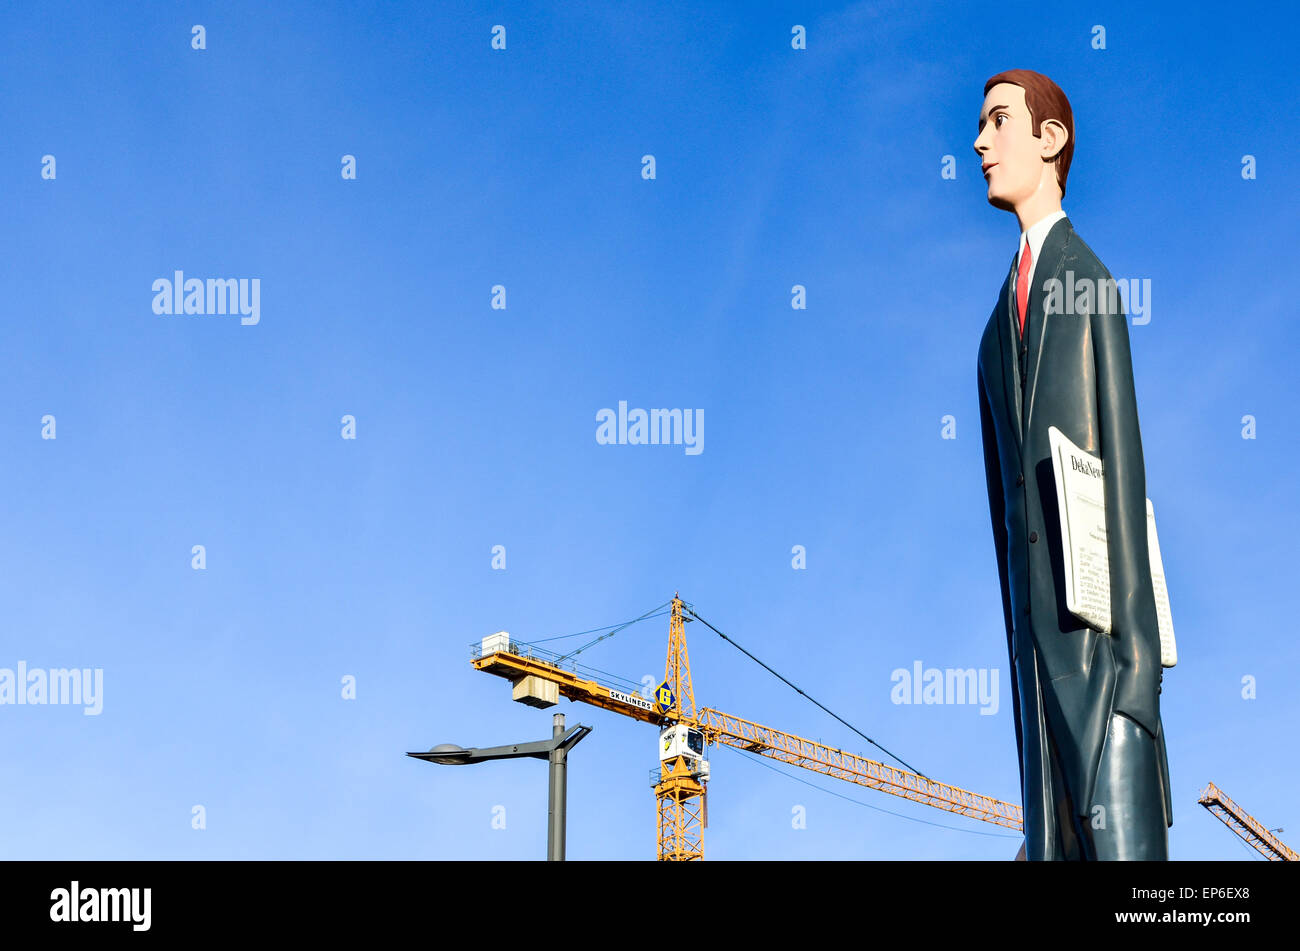 Statue of 'The Tall Banker' in Kirchberg, Luxembourg City, and construction cranes in the background Stock Photo